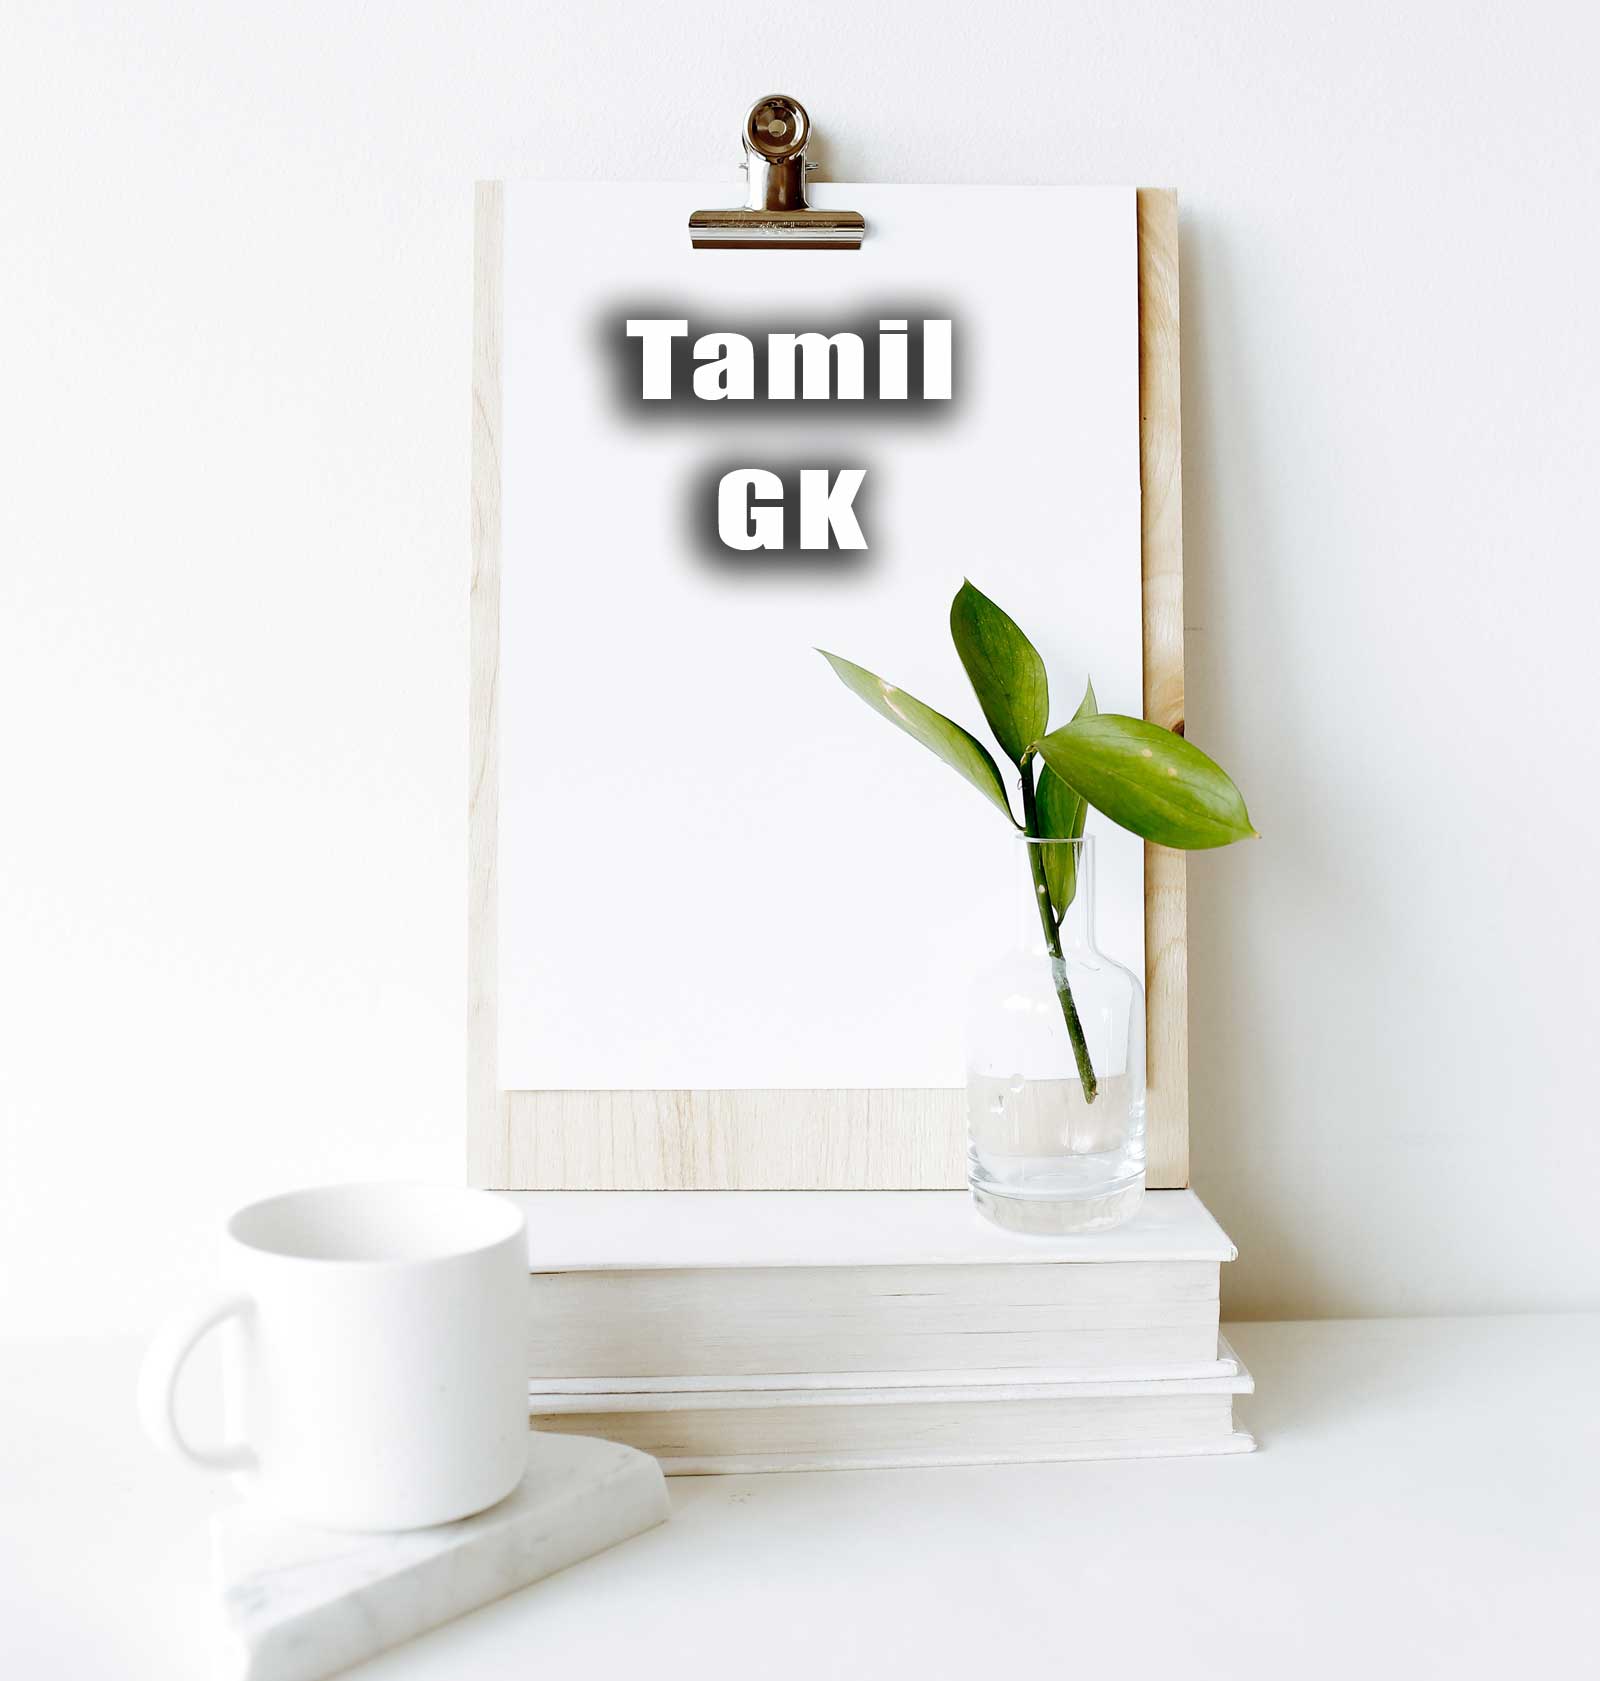 Tamil GK Objective Questions and Answers